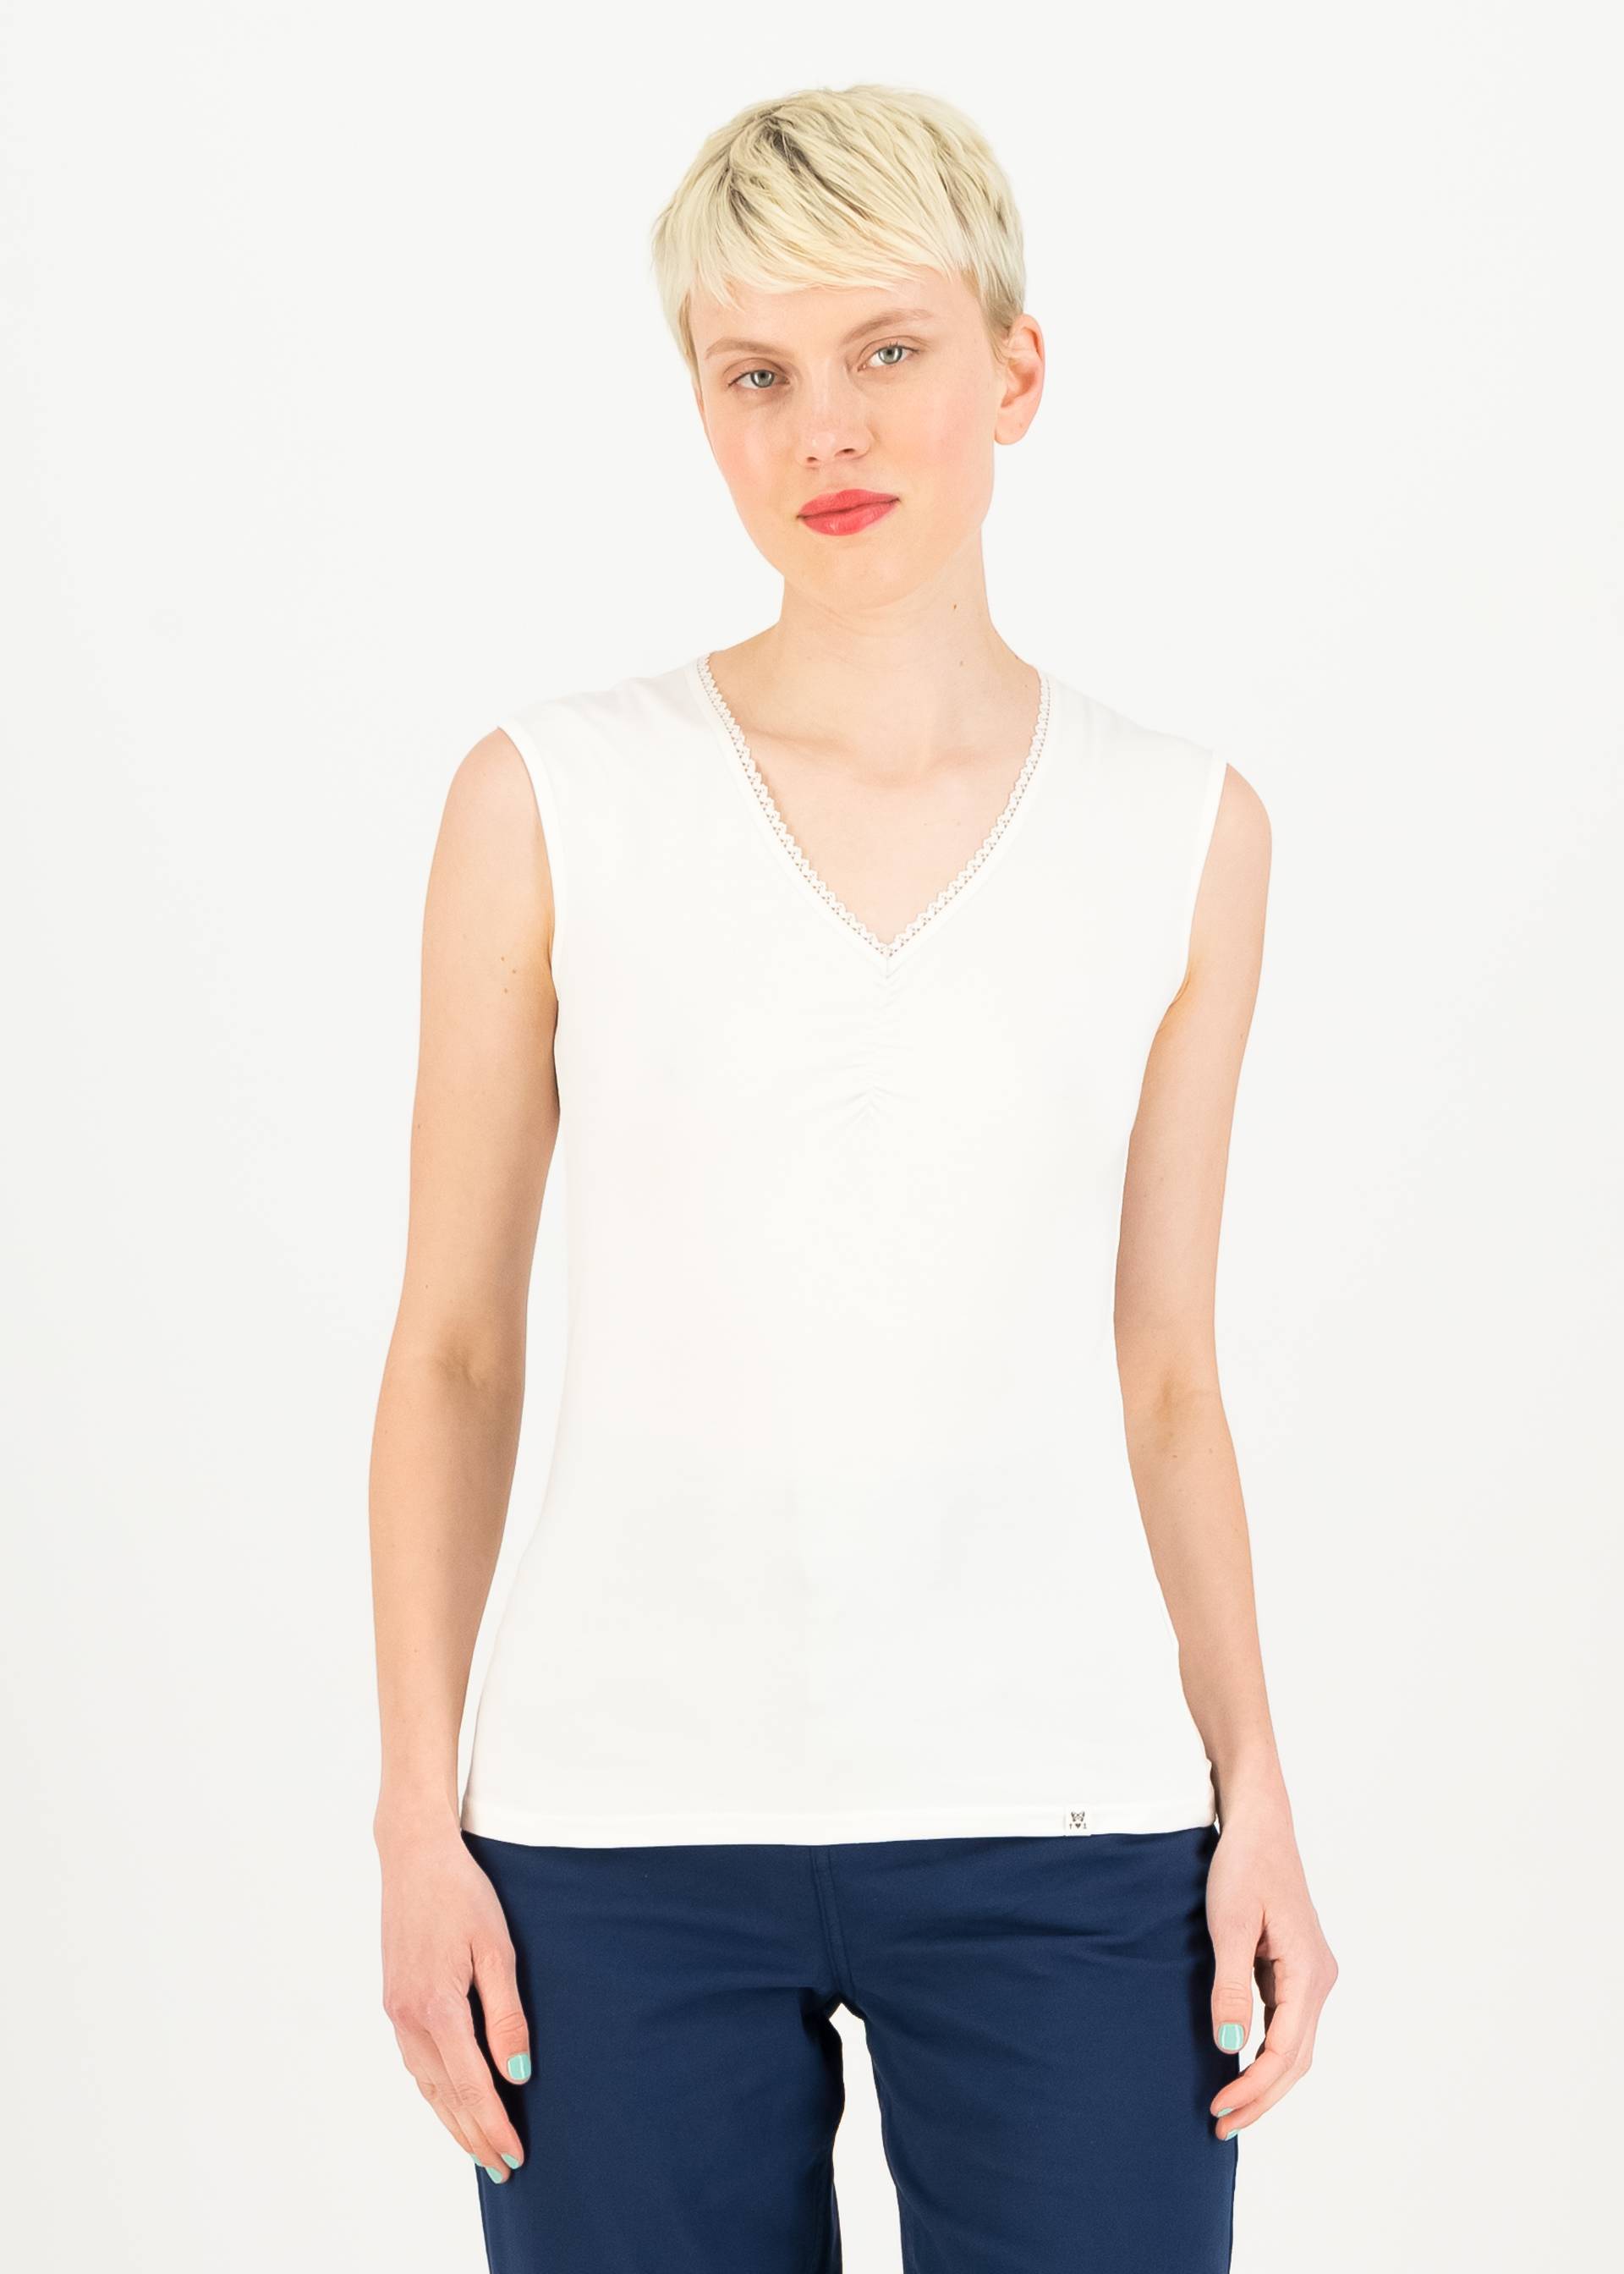 Sleeveless Top Let Love Rule, pure soul white, Tops, White